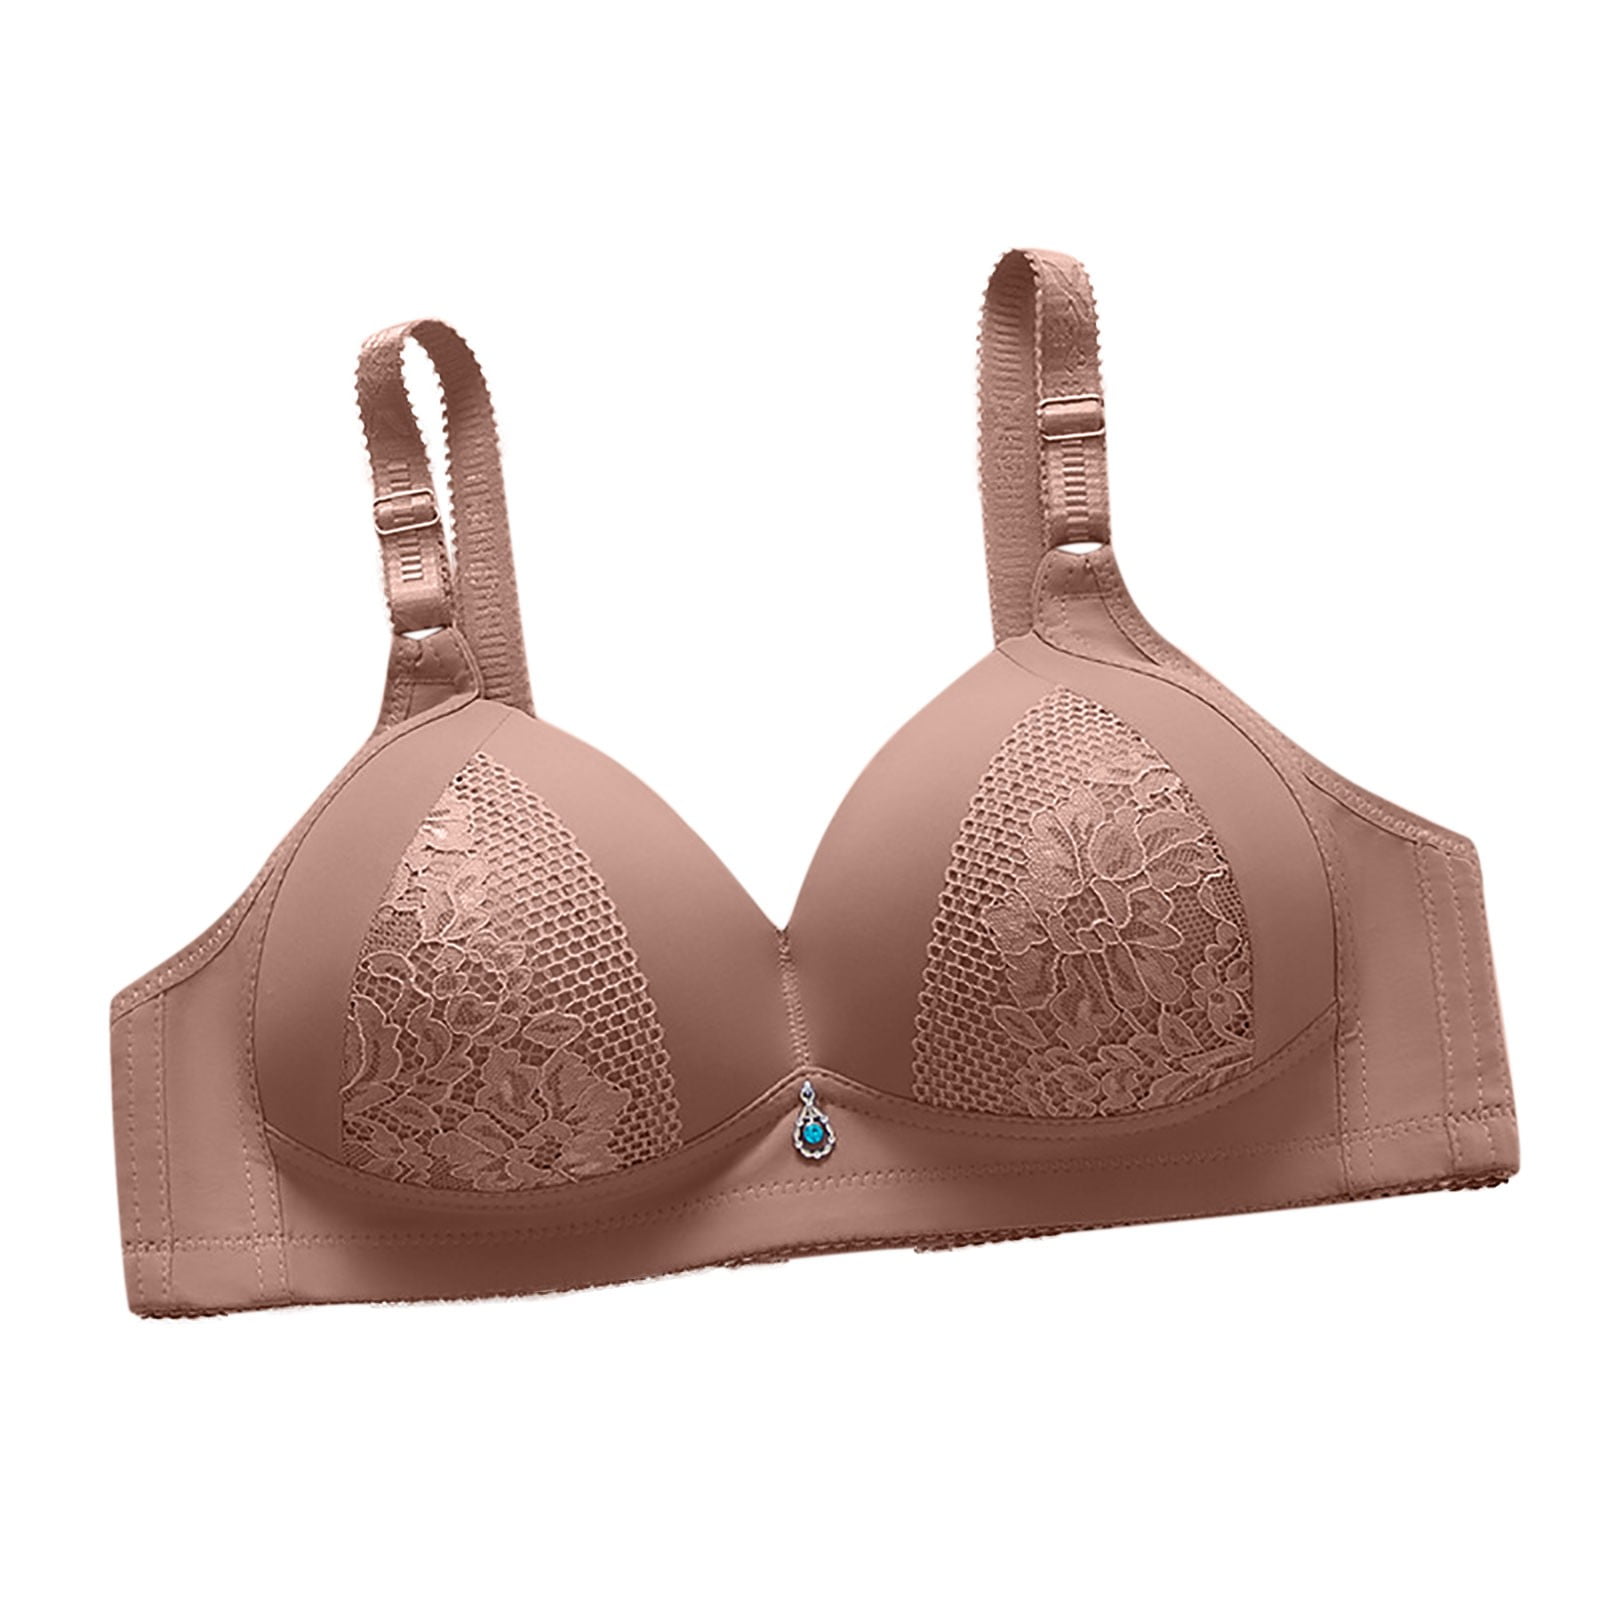 Plus Size Everyday Bras for Women Seamless Wireless Push Up Full